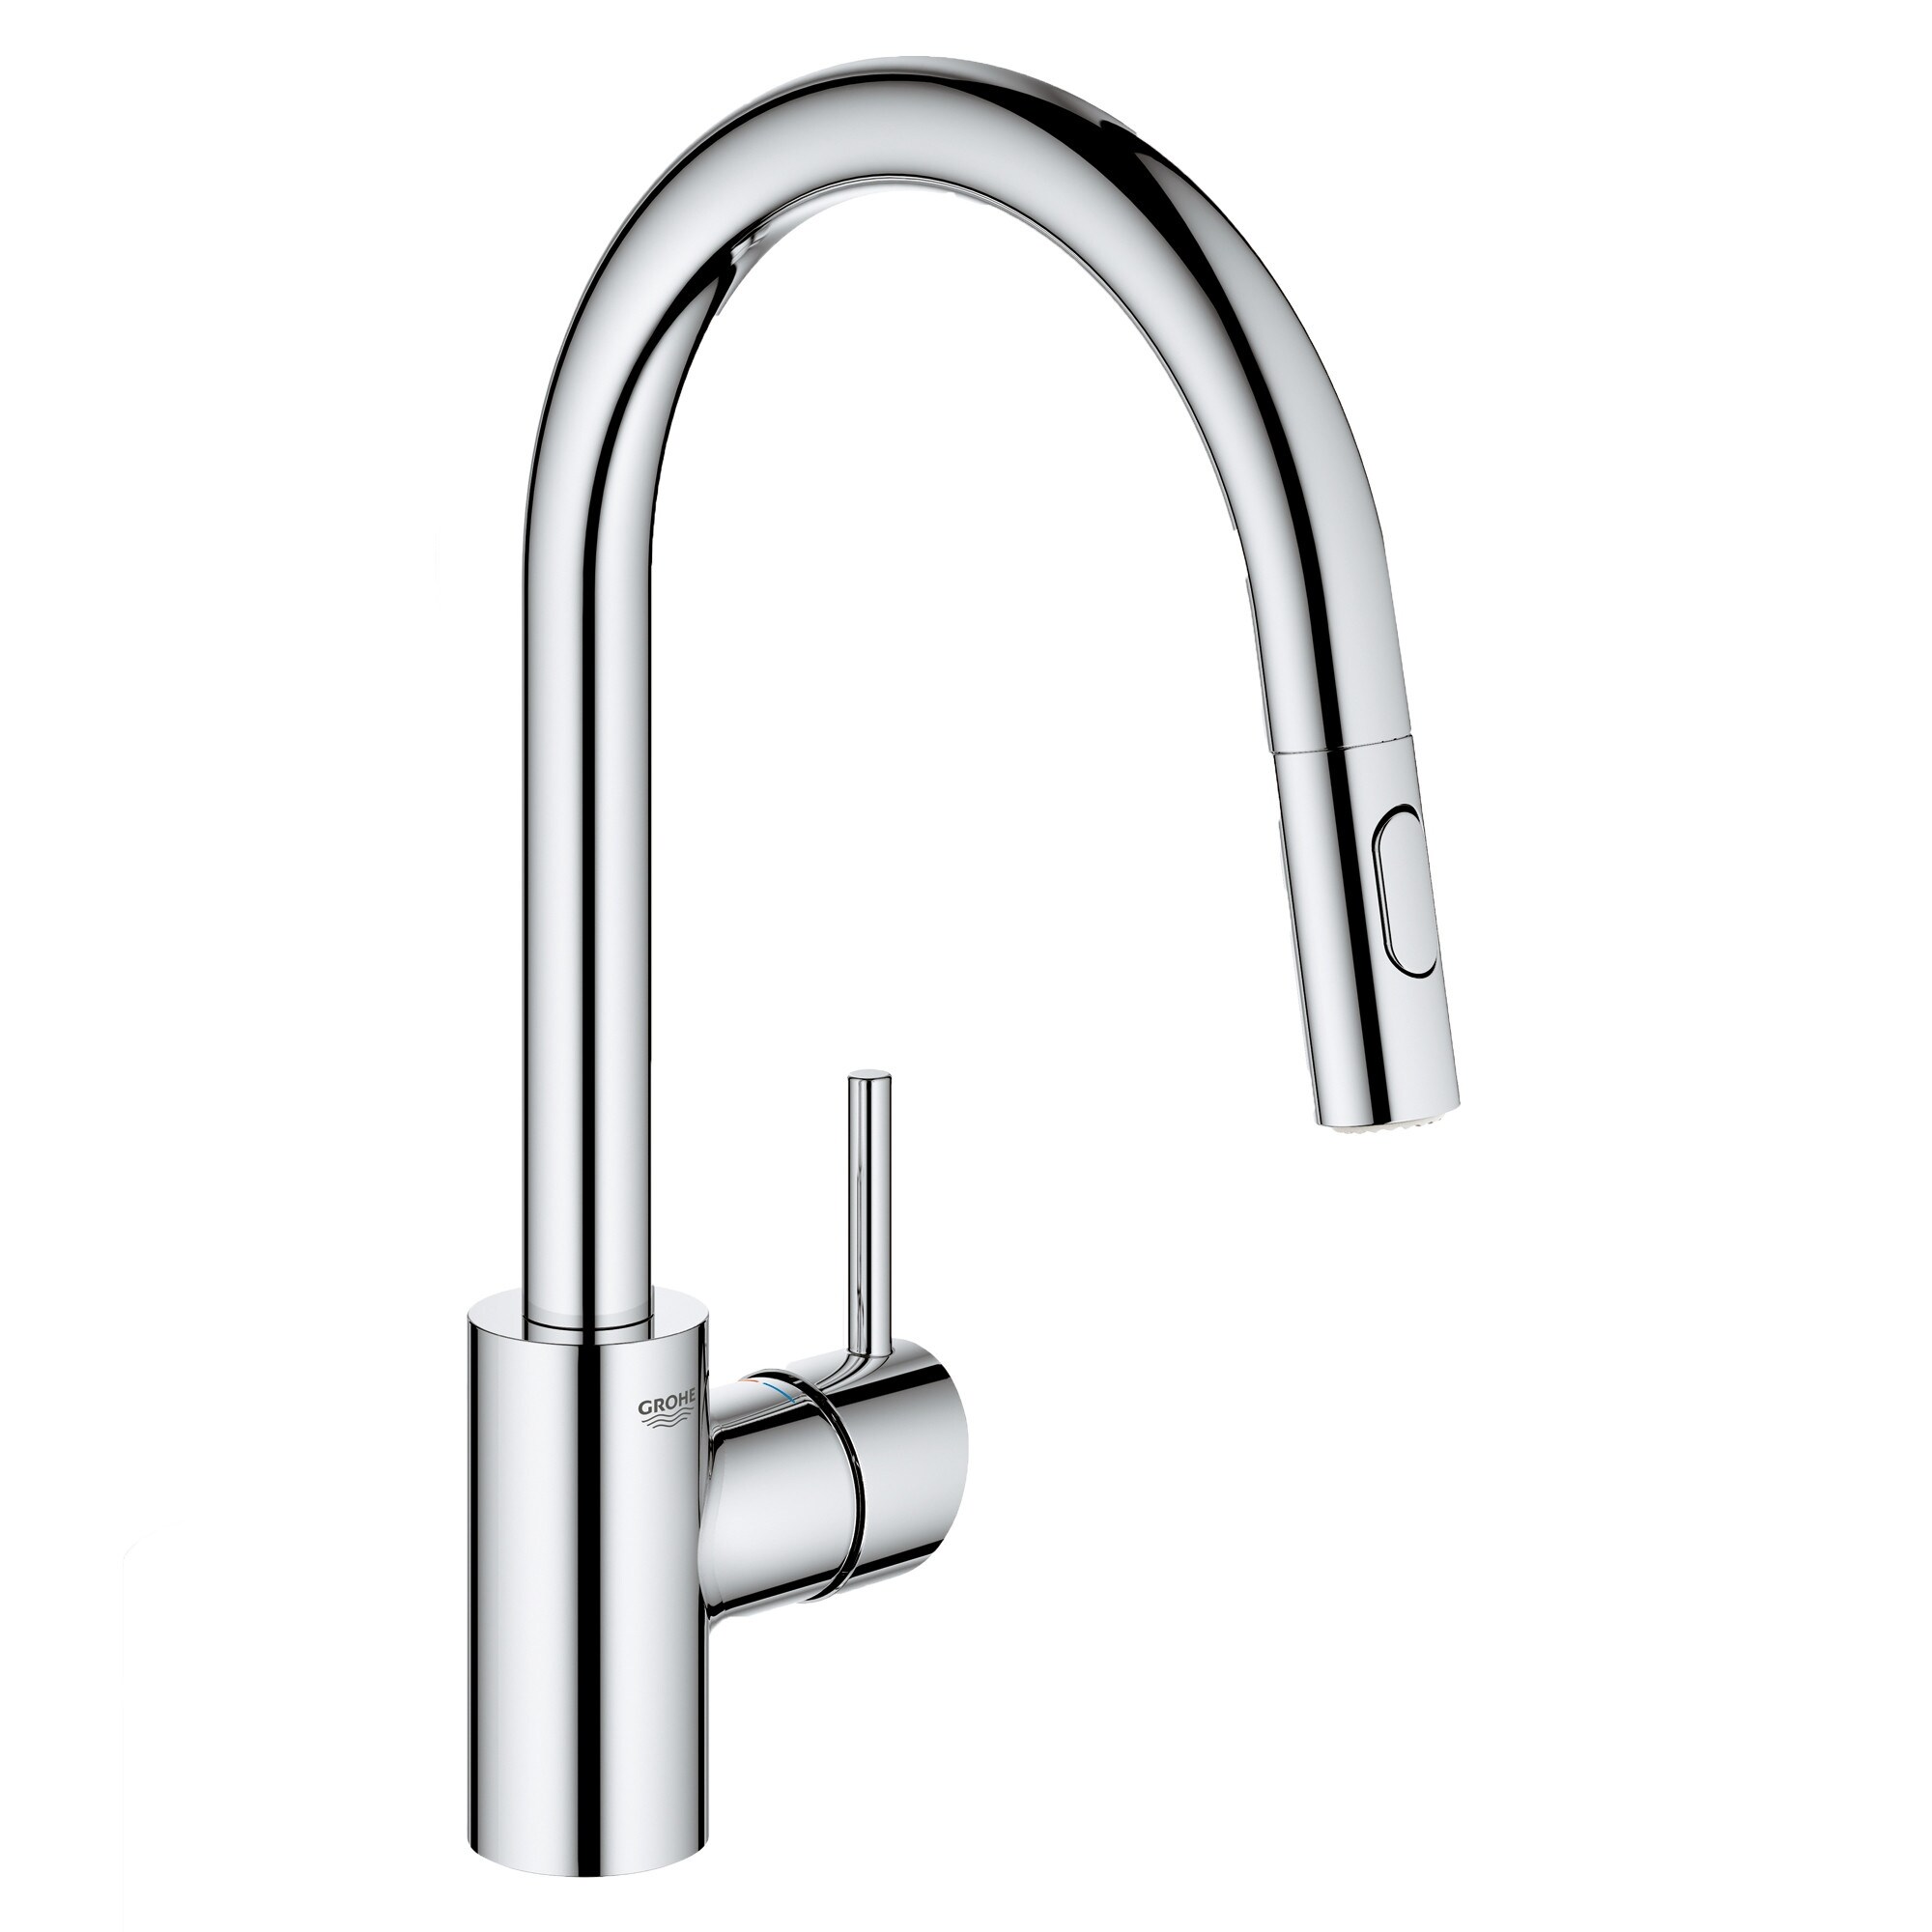 Grohe 32 665 3 Concetto 175 Gpm Single Hole Pull Down Kitchen Faucet Overstock 29567711